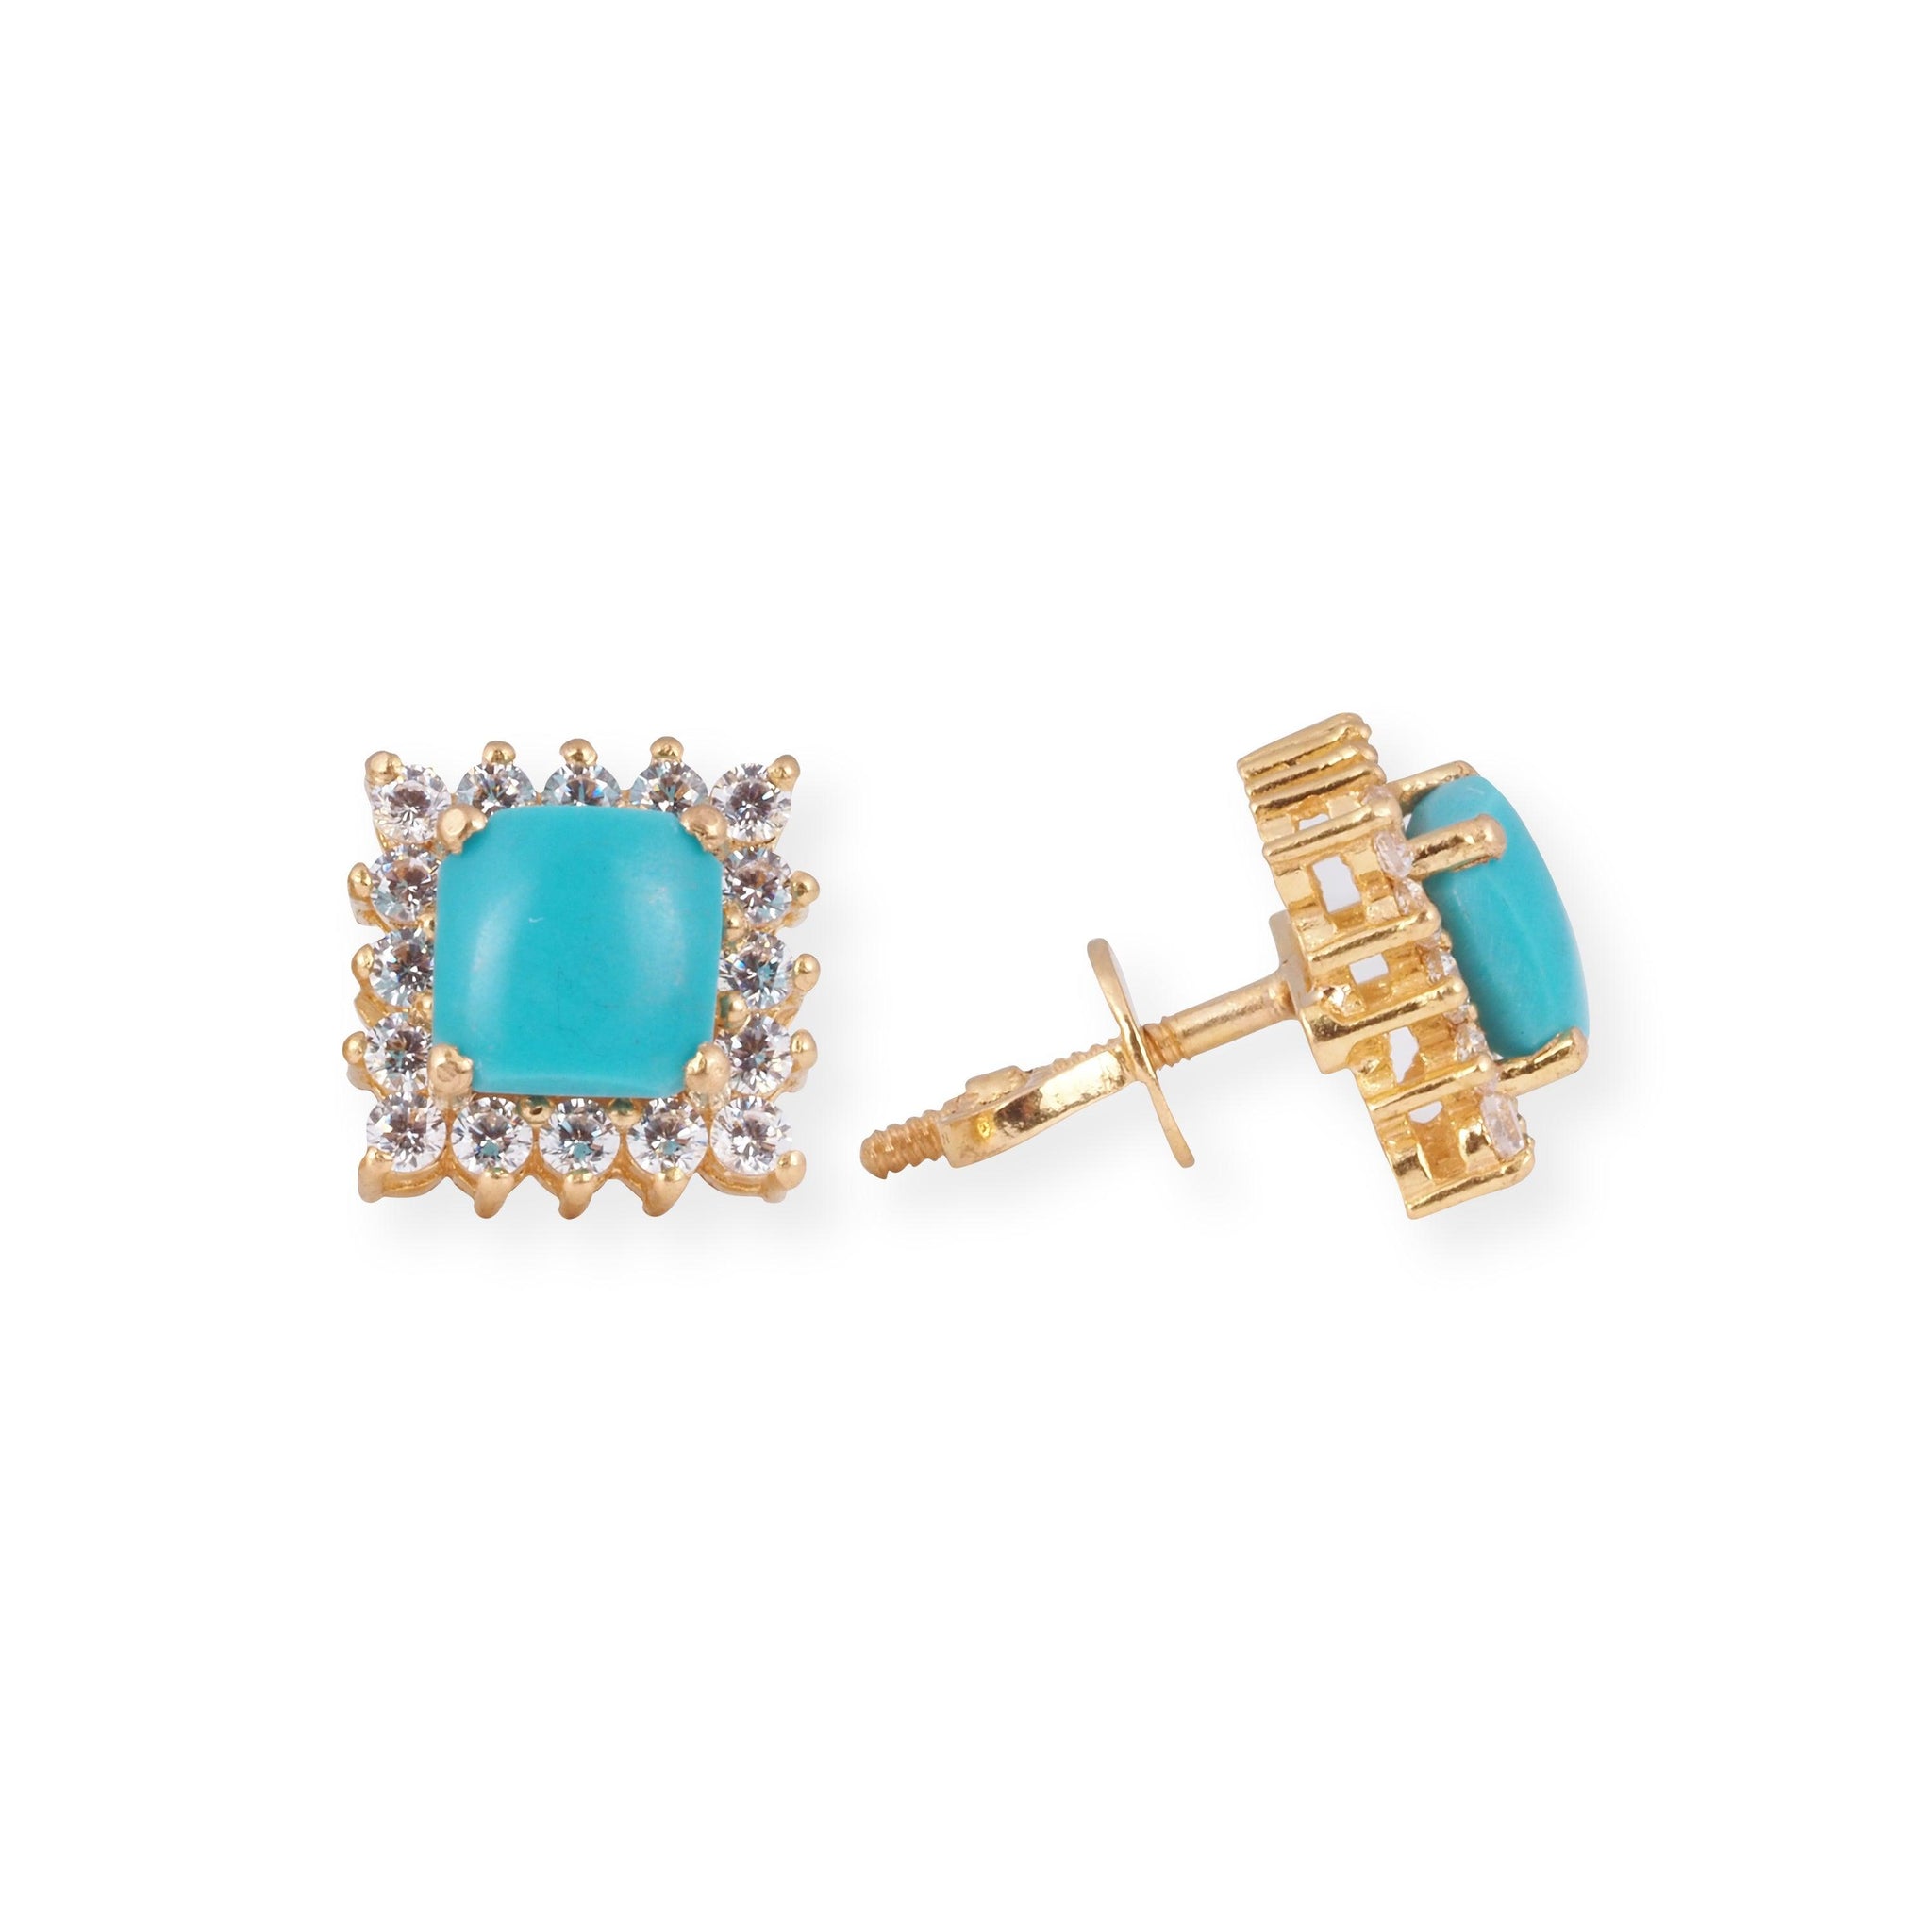 22ct Gold Set with Turquoise and Cubic Zirconia Stones (Pendant + Chain + Earrings) PE-8006